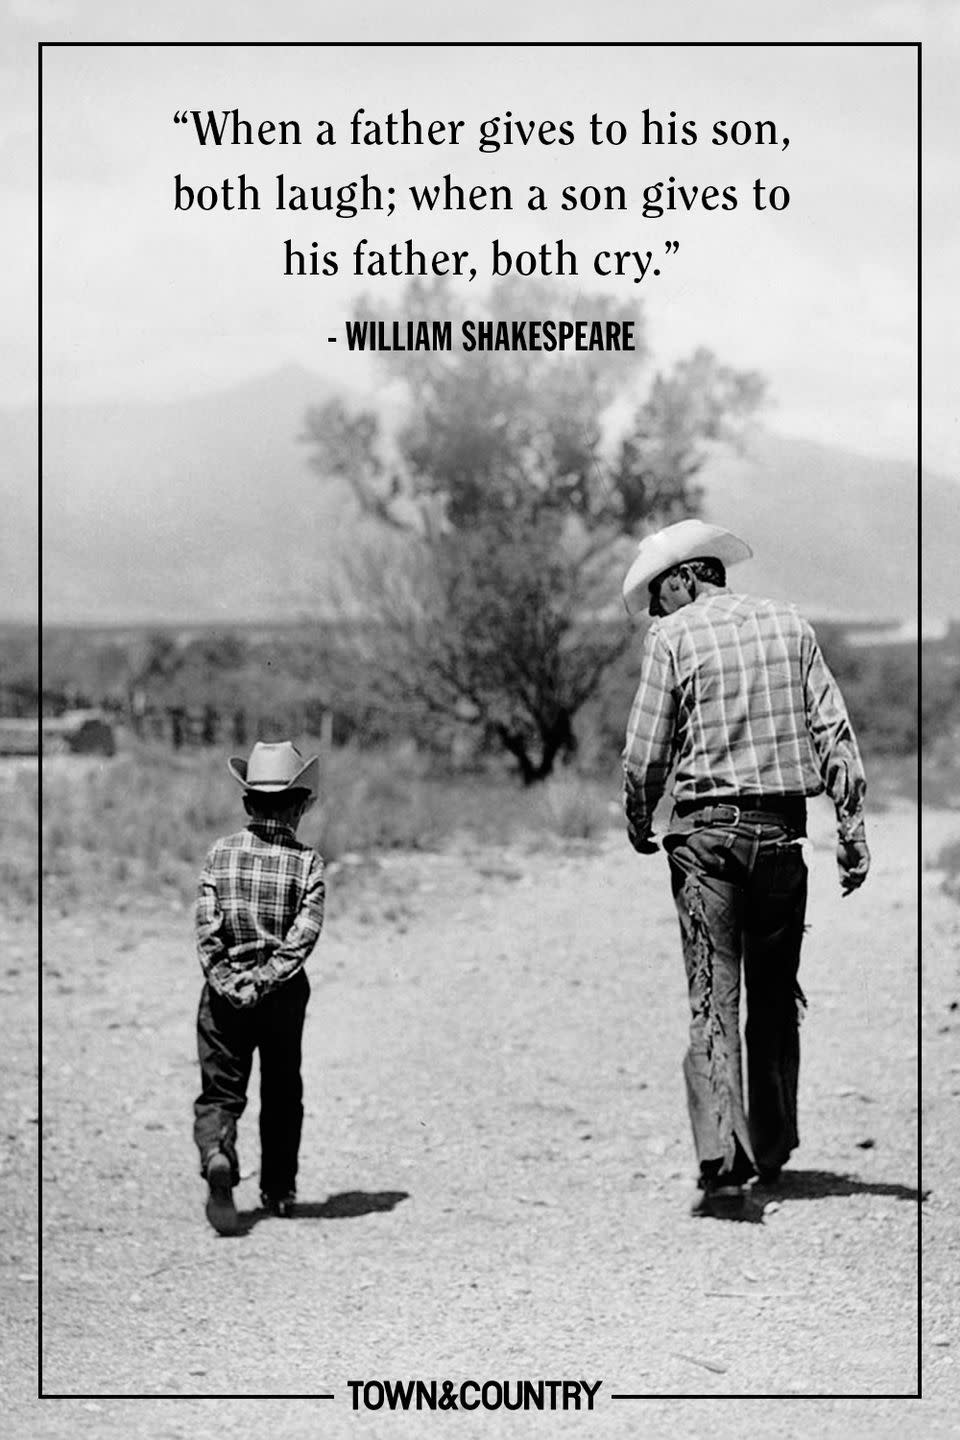 <p>"When a father gives to his son, both laugh; when a son gives to his father, both cry."</p><p>- William Shakespeare</p>